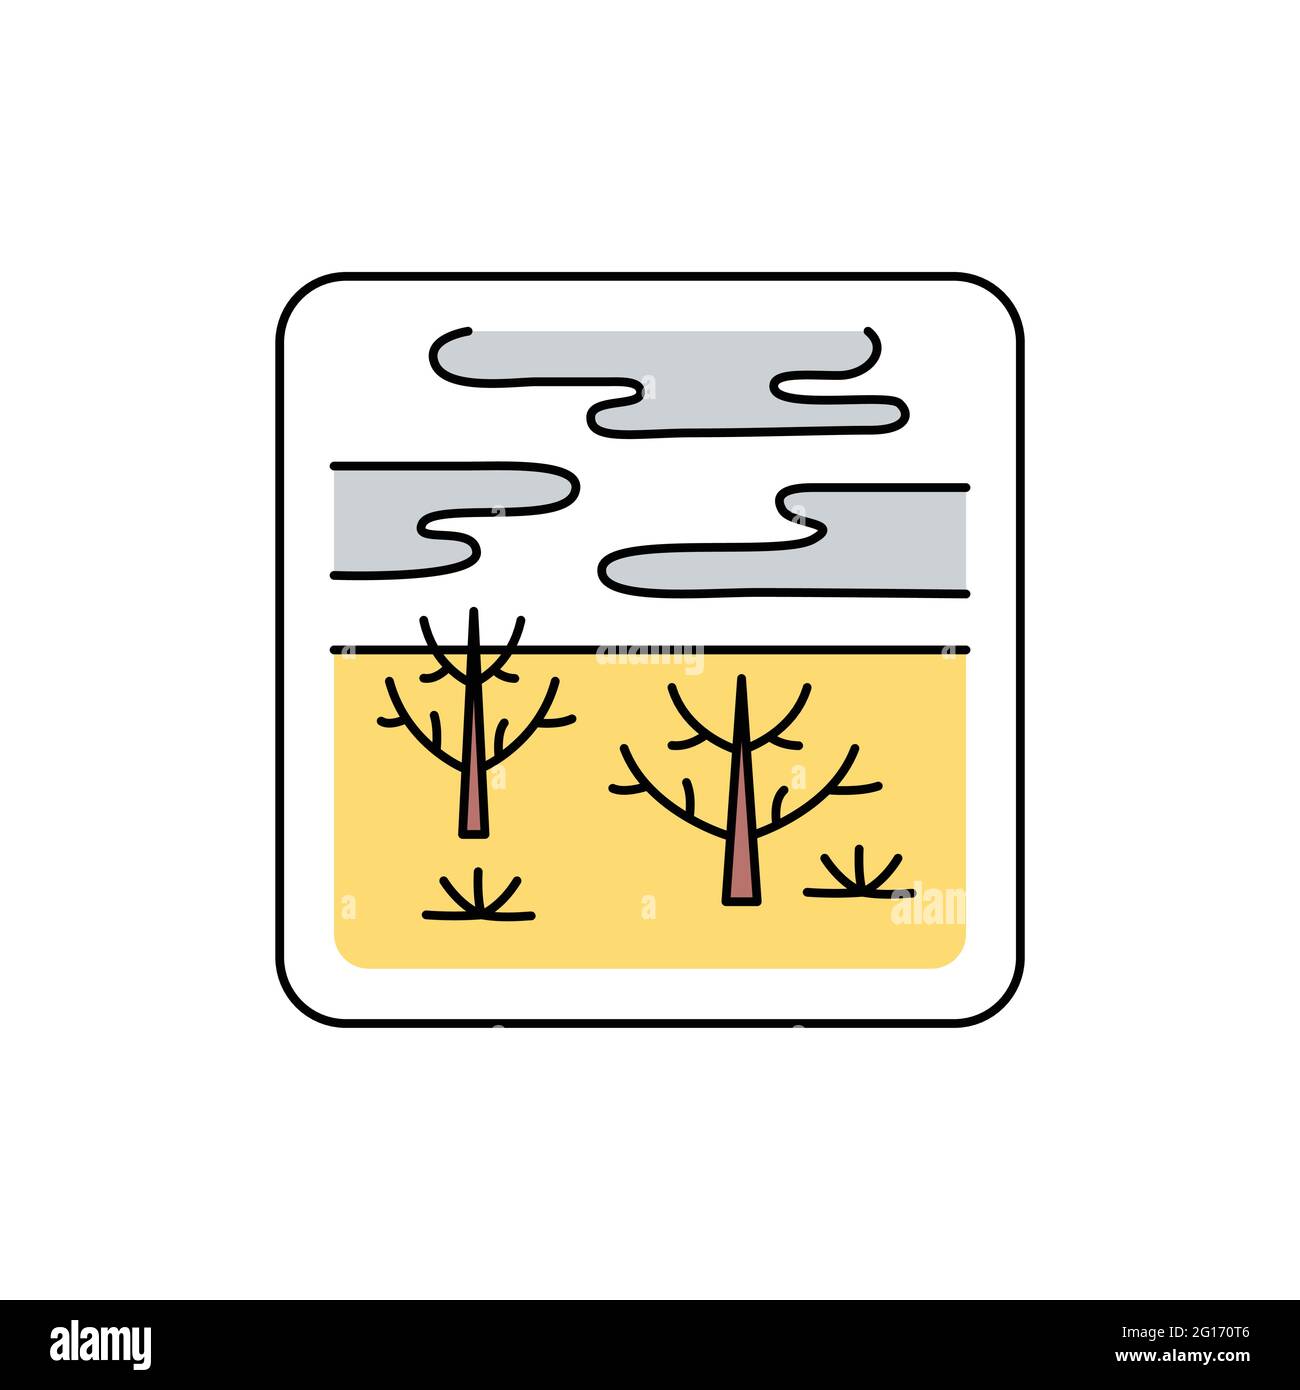 Barren landscape color line icon. Isolated vector element. Outline pictogram for web page, mobile app, promo Stock Vector